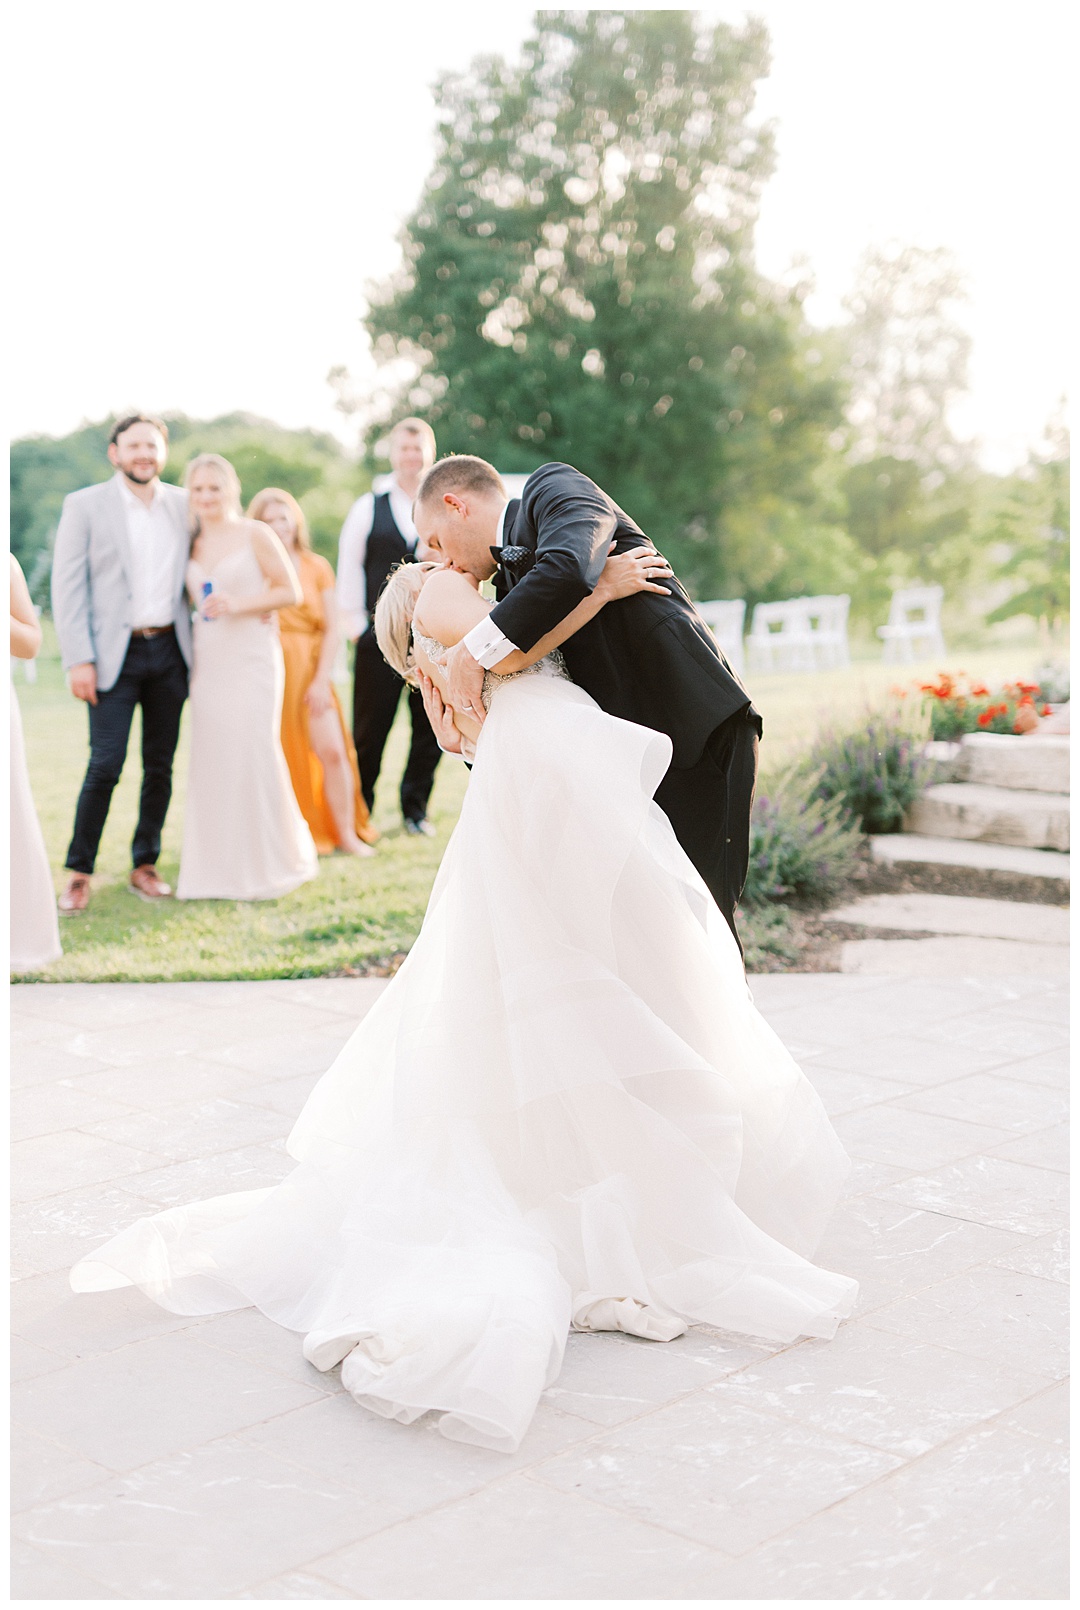 Dip Kiss First Dance Lush Backyard Wedding on Film Featured on Magnolia Rouge with Sarah Sunstrom Photography